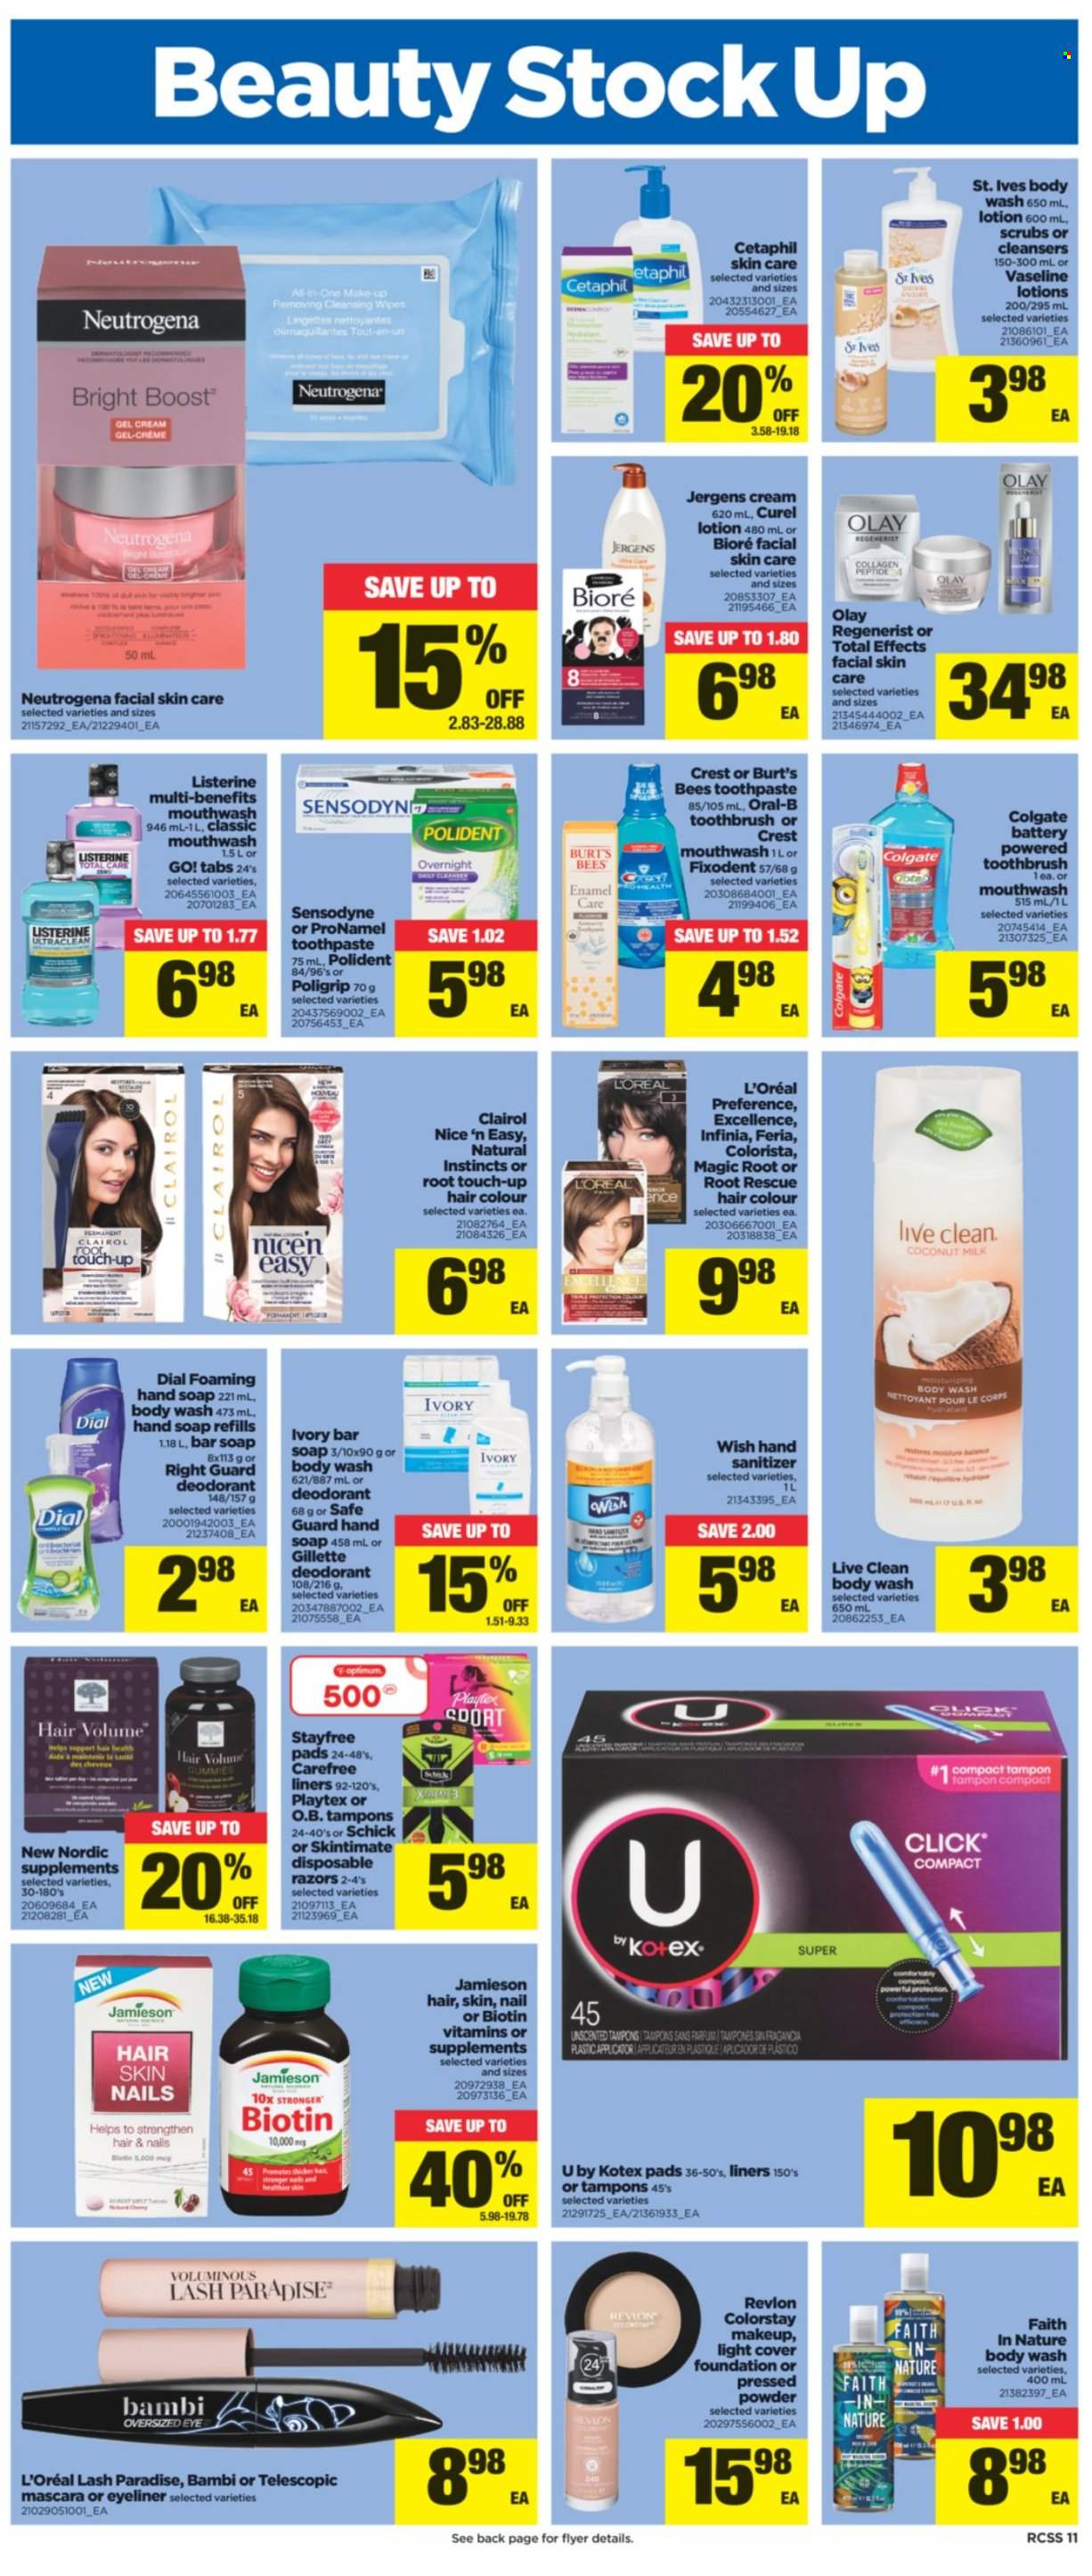 thumbnail - Real Canadian Superstore Flyer - September 23, 2021 - September 29, 2021 - Sales products - coconut milk, Boost, L'Or, cleansing wipes, wipes, body wash, hand soap, Vaseline, soap bar, Dial, soap, toothbrush, toothpaste, mouthwash, Fixodent, Polident, Crest, Stayfree, Playtex, Carefree, Kotex, Kotex pads, tampons, gel cream, L’Oréal, Olay, Curél, Bioré®, Root Touch-Up, Clairol, Revlon, hair color, body lotion, Jergens, anti-perspirant, Schick, hand sanitizer, makeup, mascara, eyeliner, face powder, Biotin, Go!, Colgate, Gillette, Listerine, Neutrogena, Oral-B, Sensodyne, deodorant. Page 11.